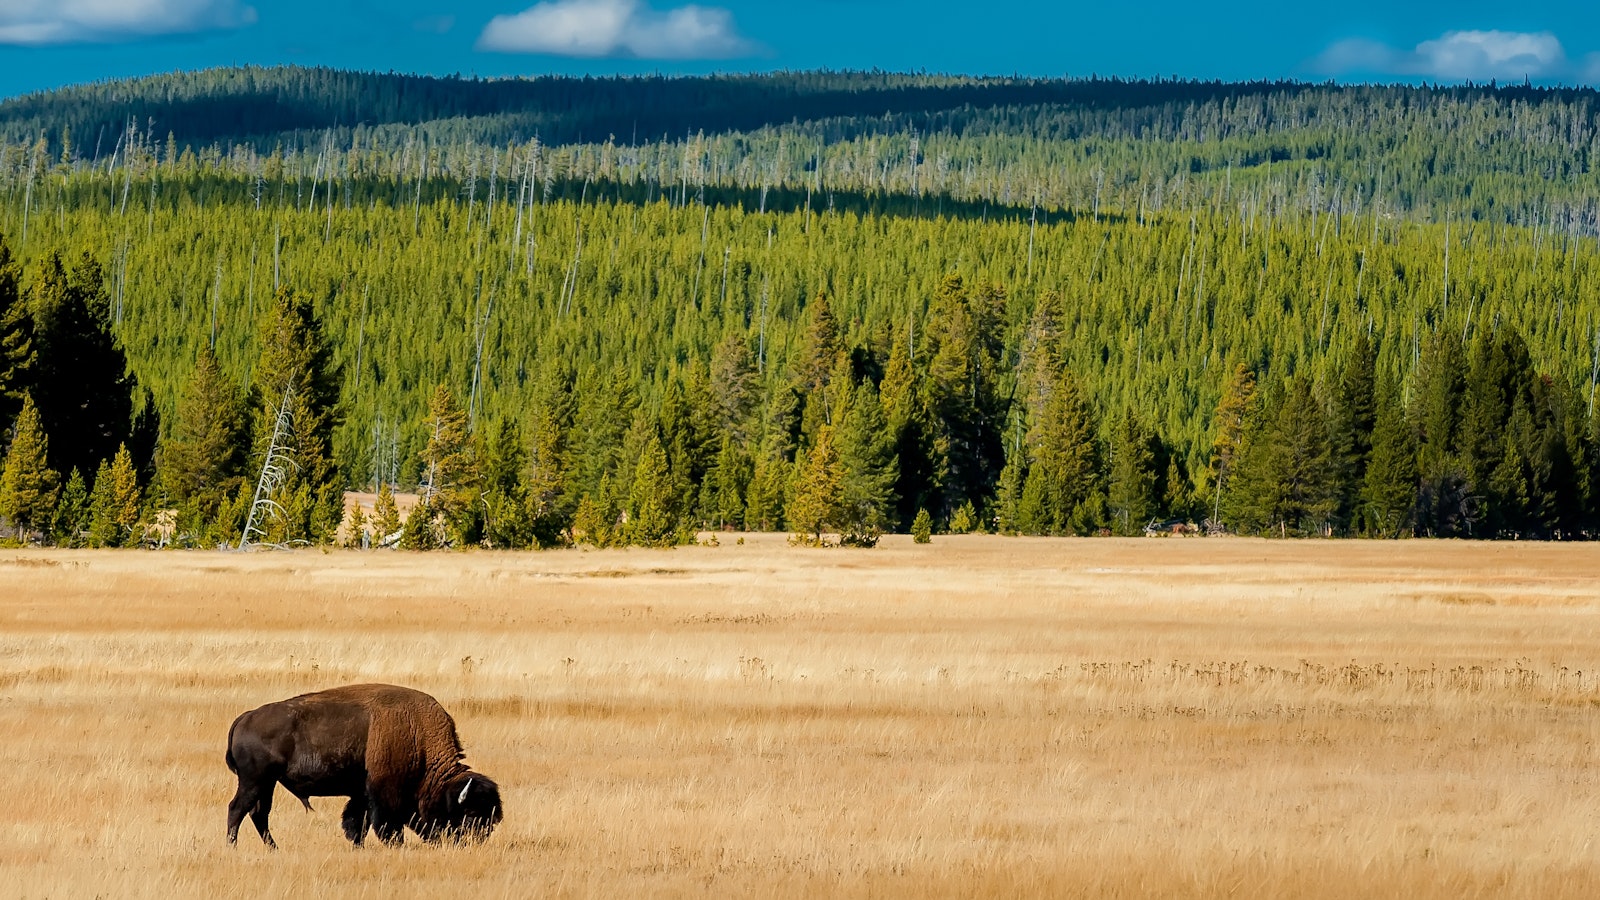 A singular bison grazes in a meadow surrounded by rolling landscapes of evergreen trees